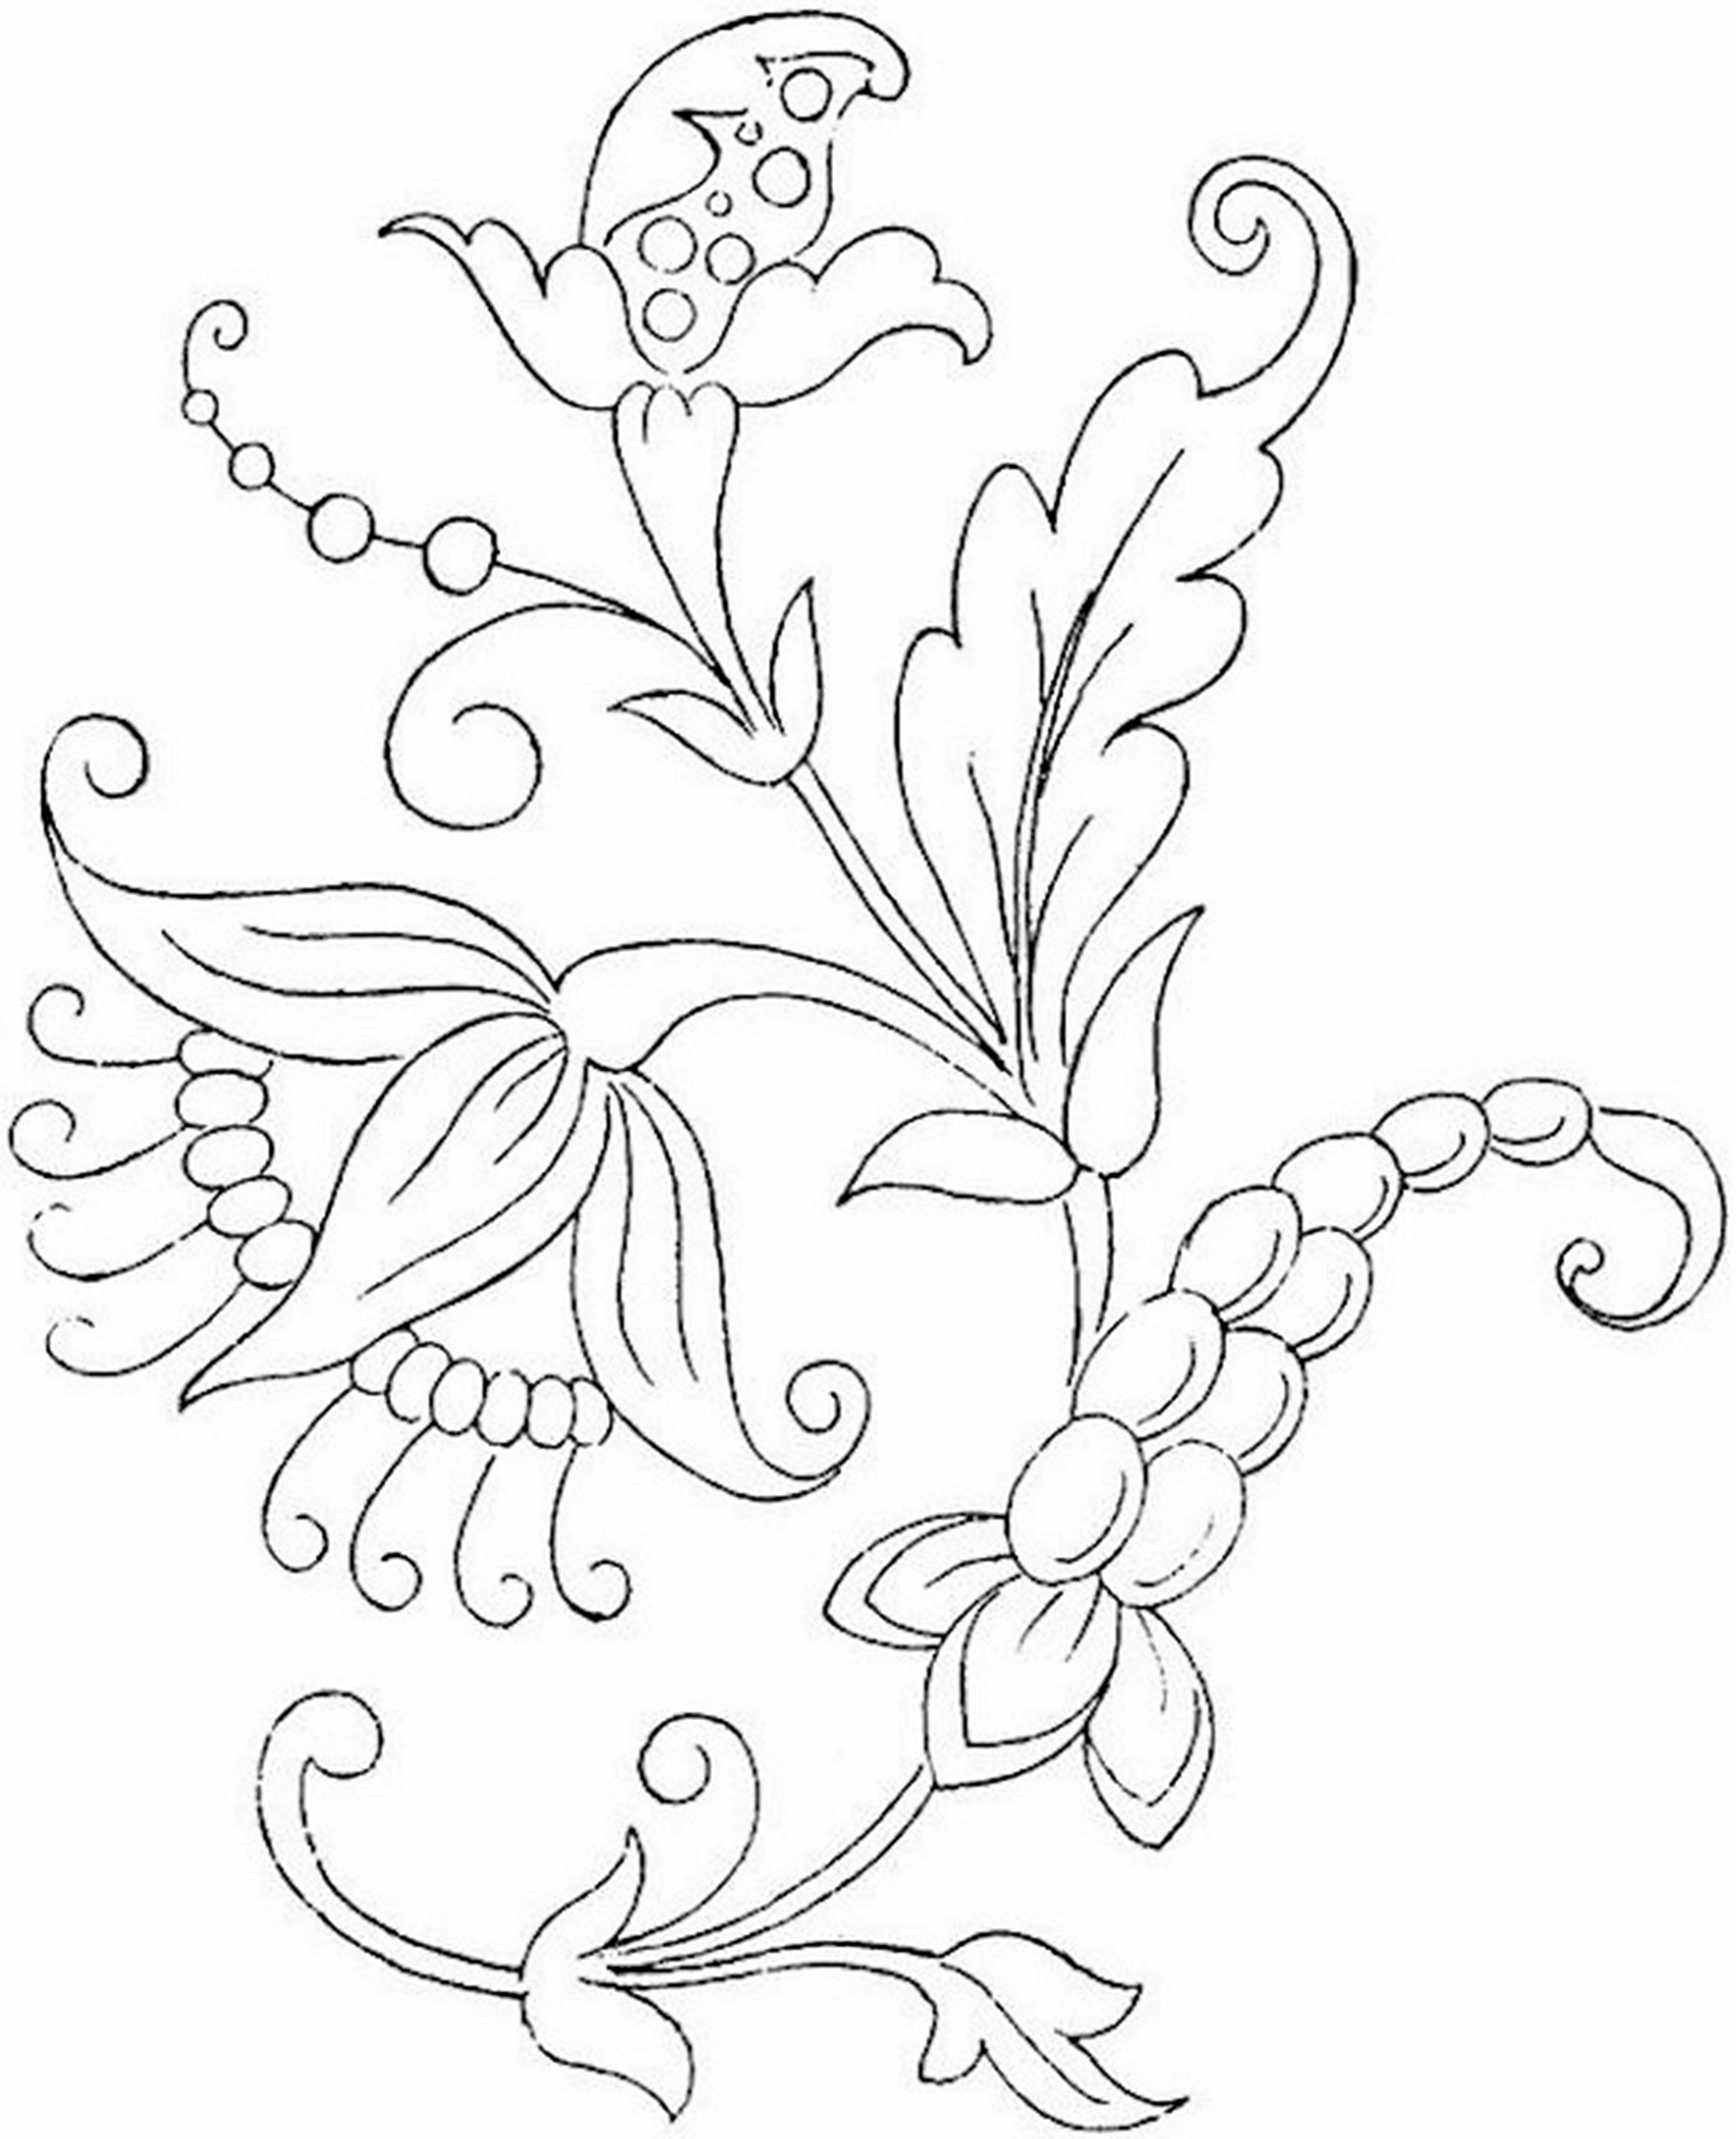 sheenaowens-flower-coloring-pages-for-kids